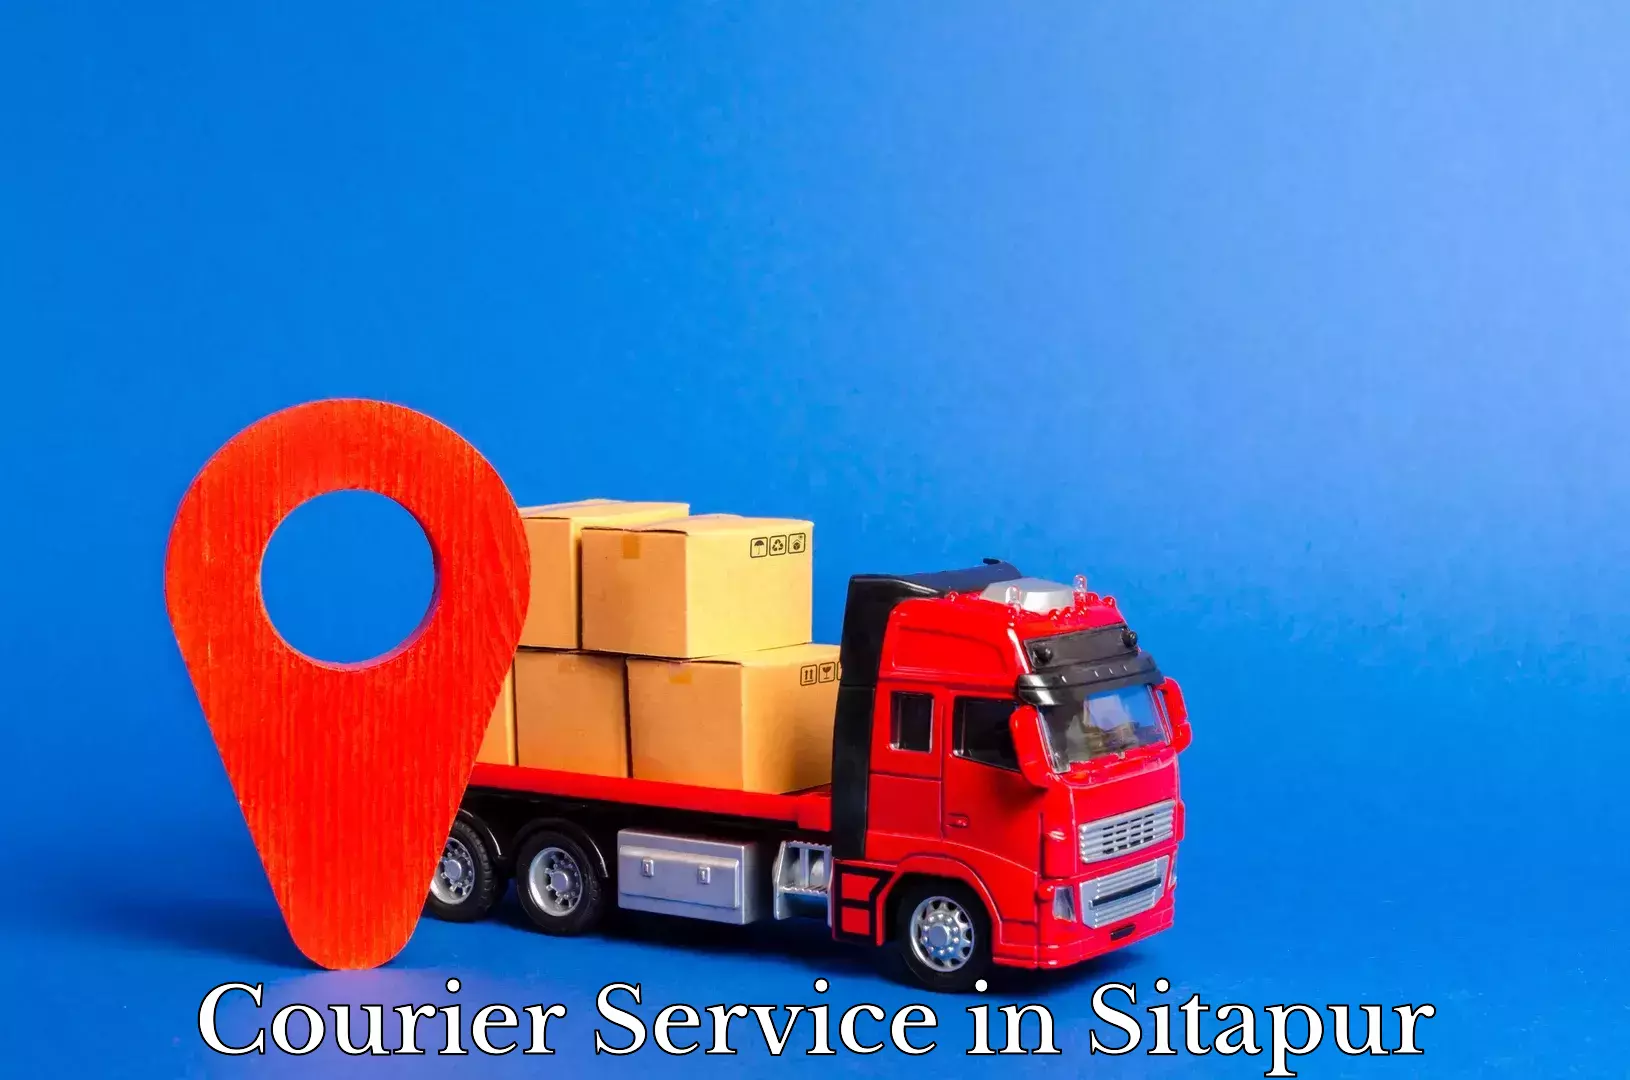 Scheduled delivery in Sitapur